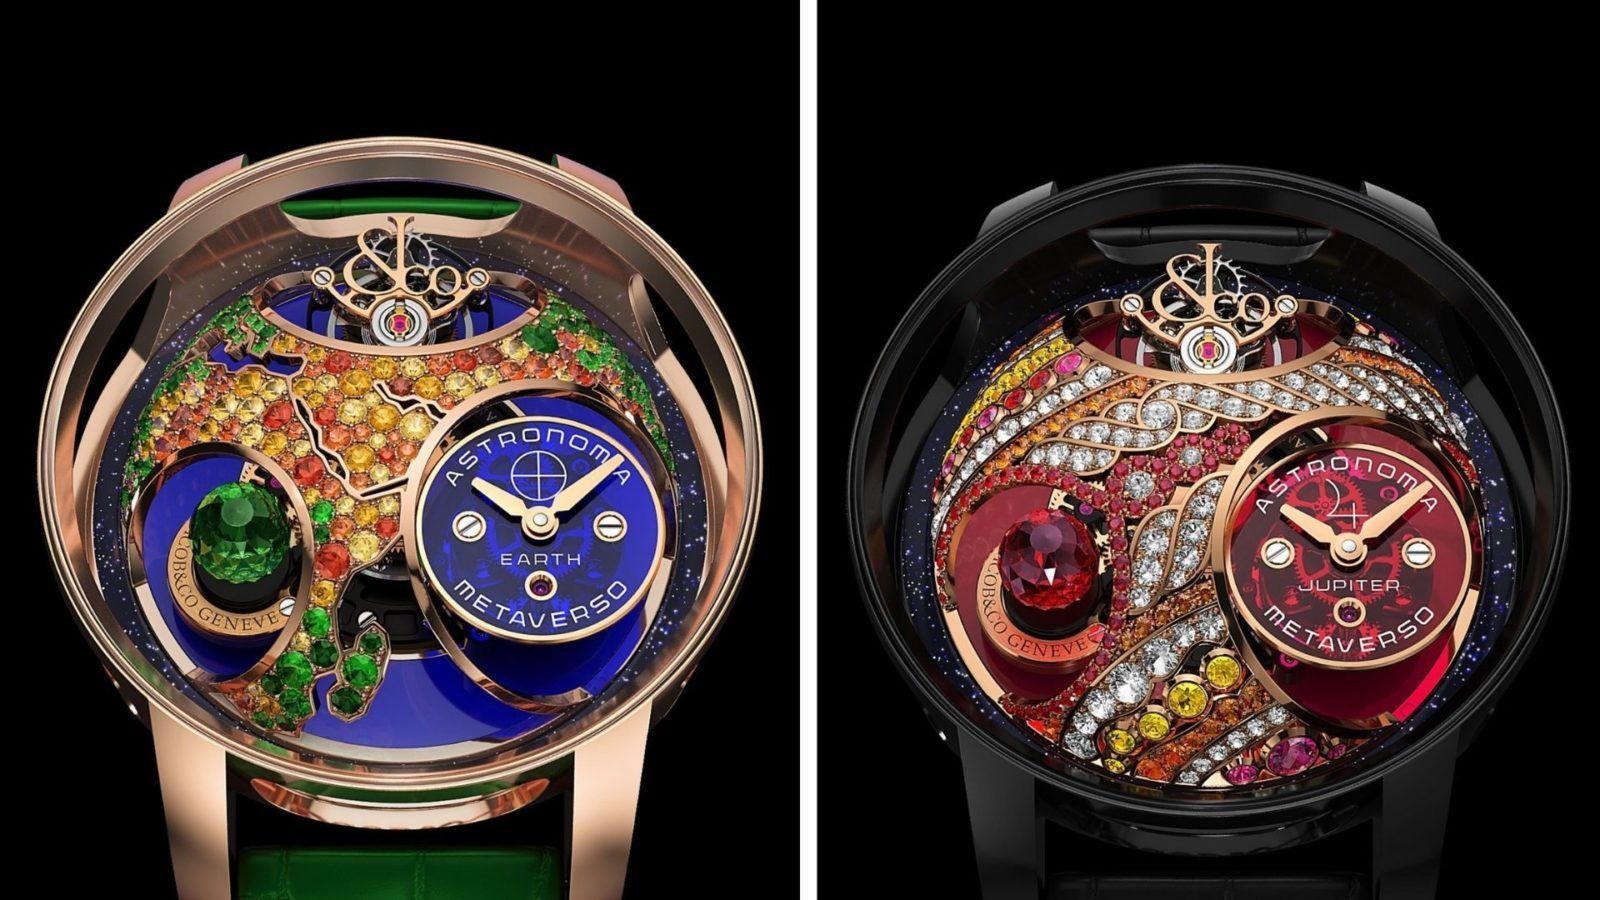 Jacob & Co. joins the metaverse with ‘Astronomia Metaverso’ NFT collection